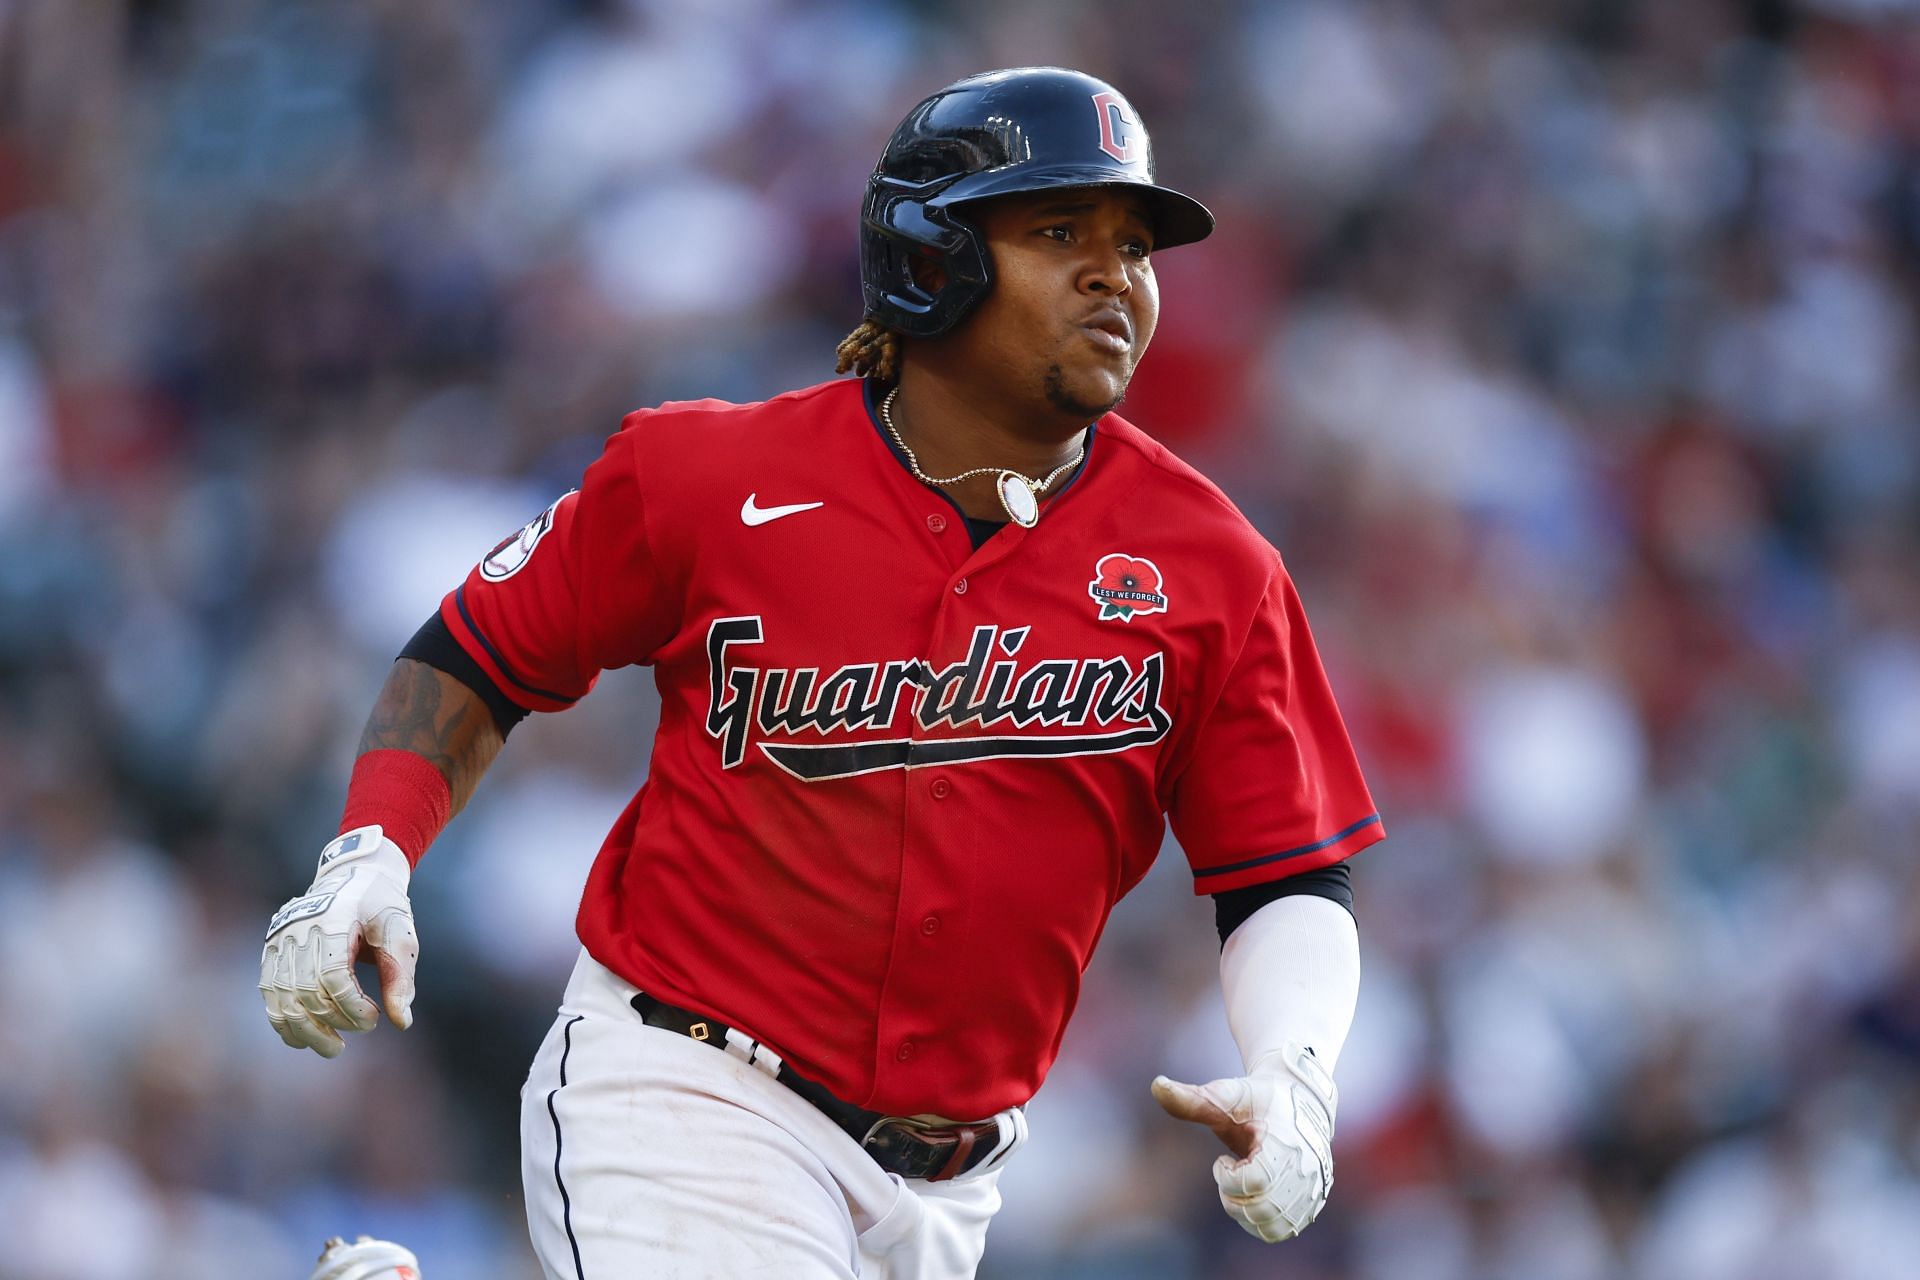 Cleveland Guardians star Jose Ramirez is one of the premier sluggers in MLB.